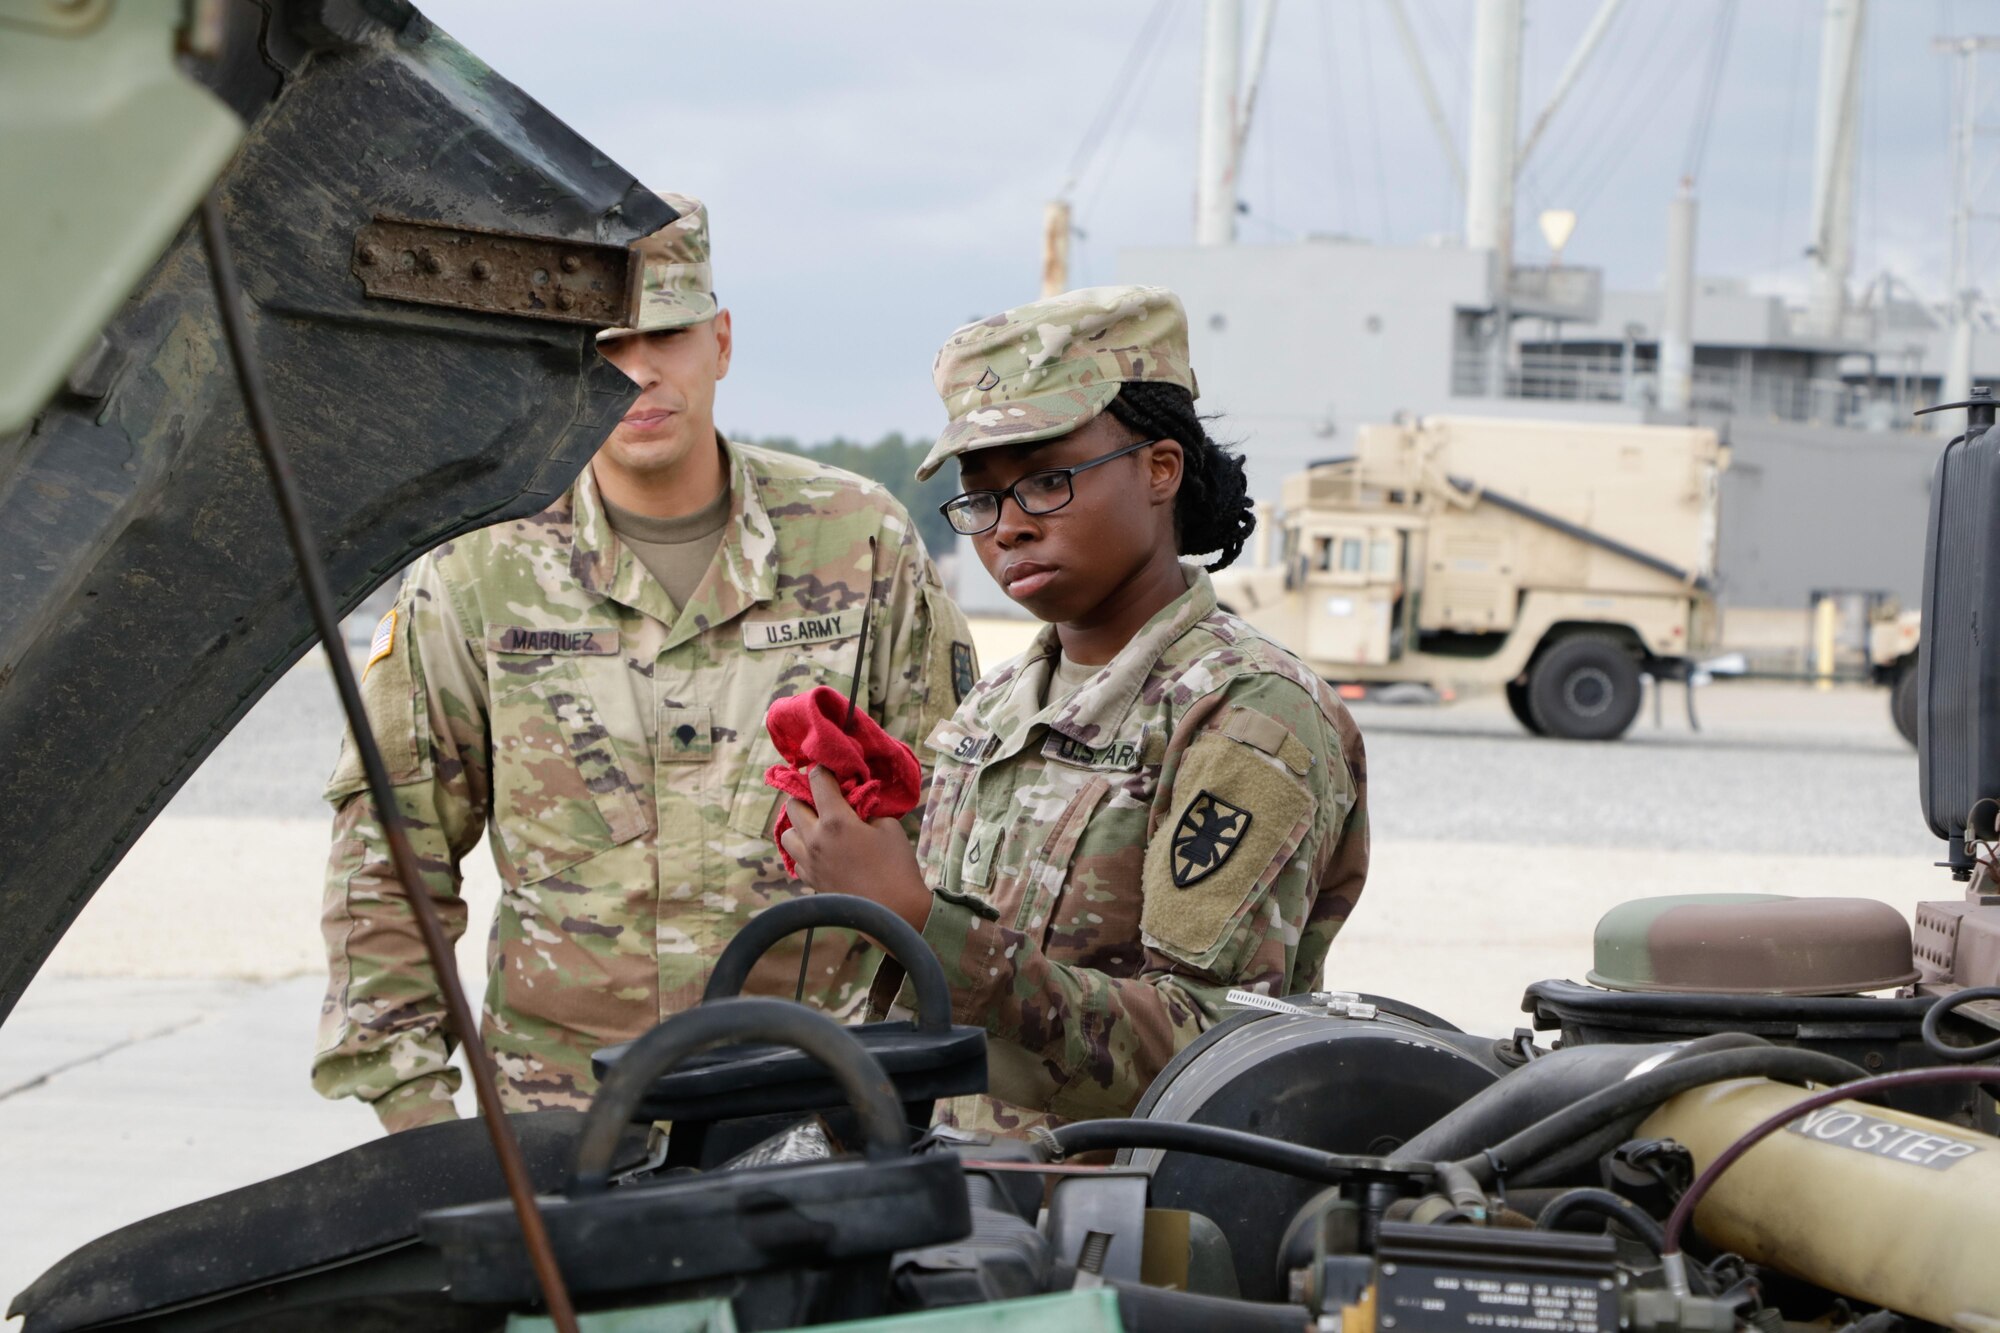 U.S. Army Pfc. Myca Smith, 558th Transportation Company, 10th Transportation Battalion, 7th Transportation Brigade (Expeditionary) human resource specialist, conducts preventive maintenance checks and services on a vehicle during the company’s first “Maintenance Rodeo” competition at Third Port, Joint Base Langley-Eustis, Va., Sept. 19, 2017.